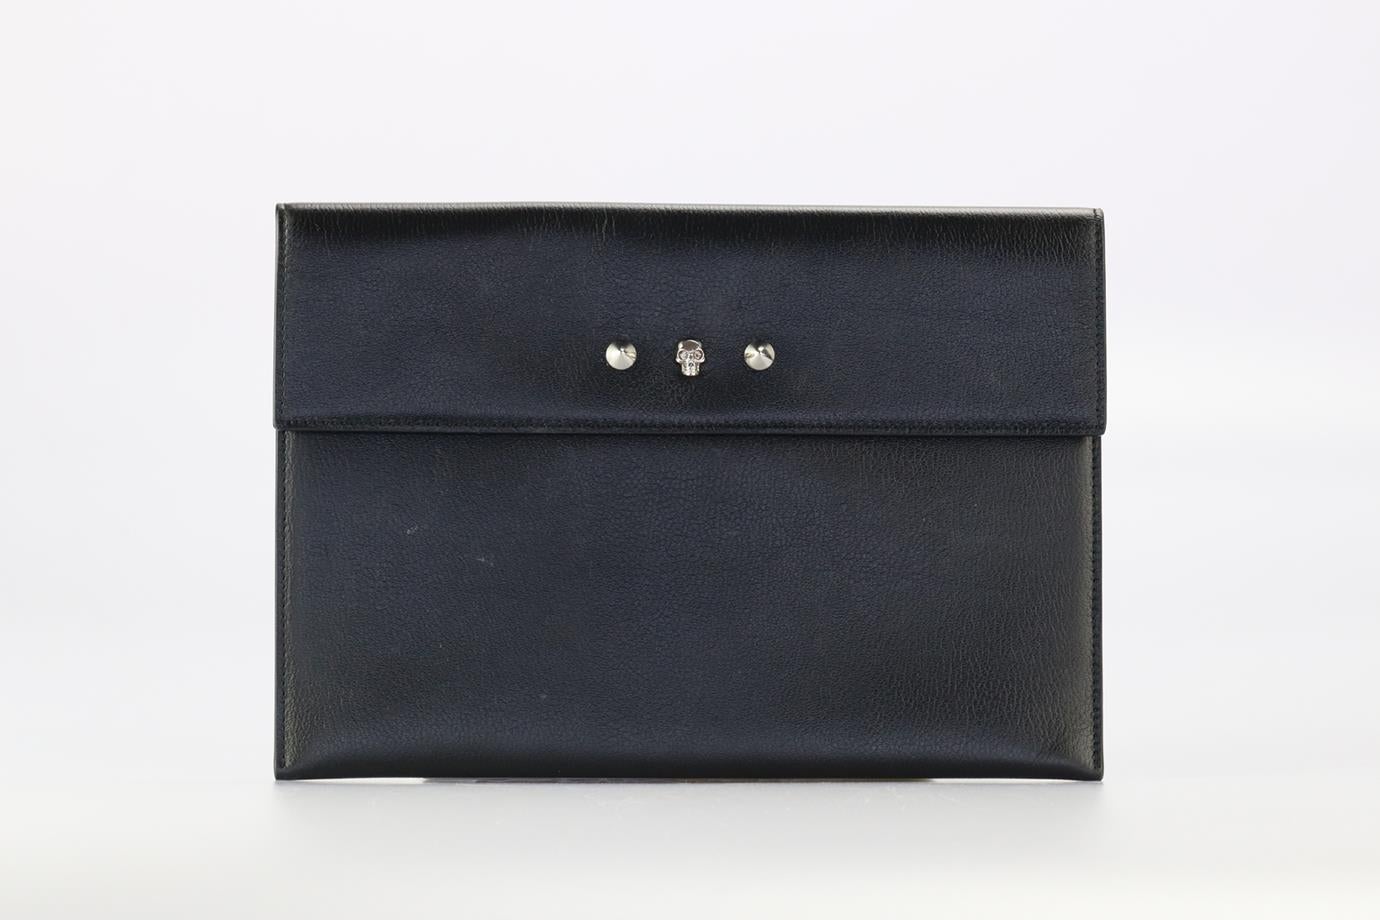 Alexander Mcqueen Studded Leather Clutch. Black. Snap button fastening - Front. Comes with - dustbag. Height: 7.7 in. Width: 11.1 in. Depth: 0.2 in. Condition: Used. Very good condition - Light scuff marks and marks to exterior material. Some light